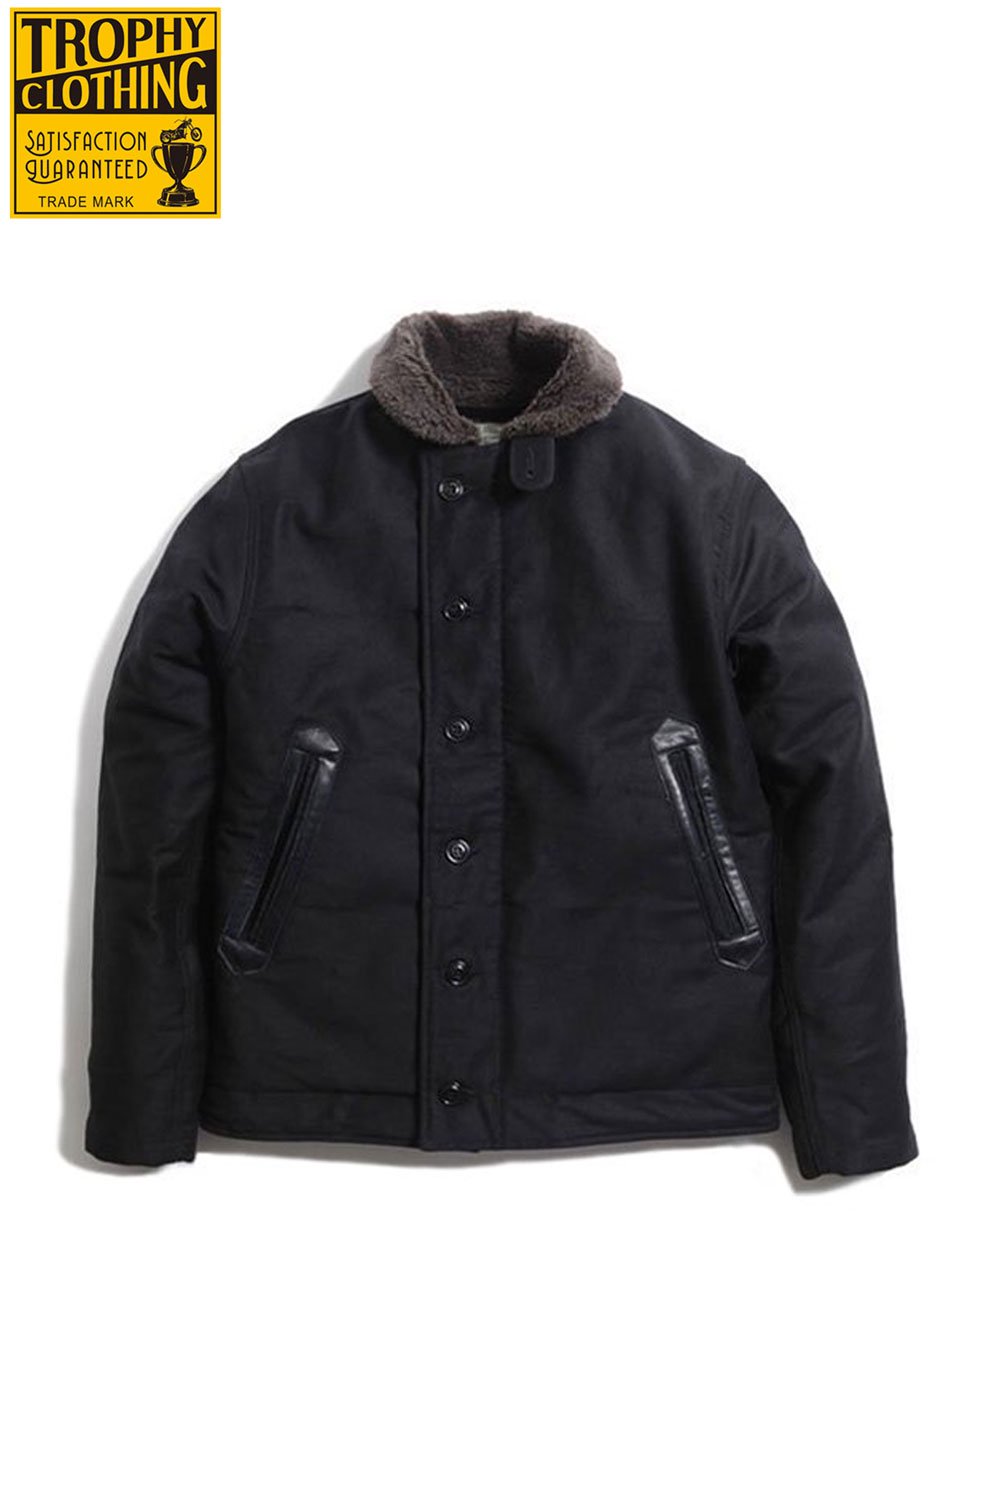 TROPHY CLOTHING(トロフィークロージング) N-1デッキジャケット N-1 TR.MFG. JACKET TR22AW-511  通販正規取扱 | ハーレムストア公式通販サイト